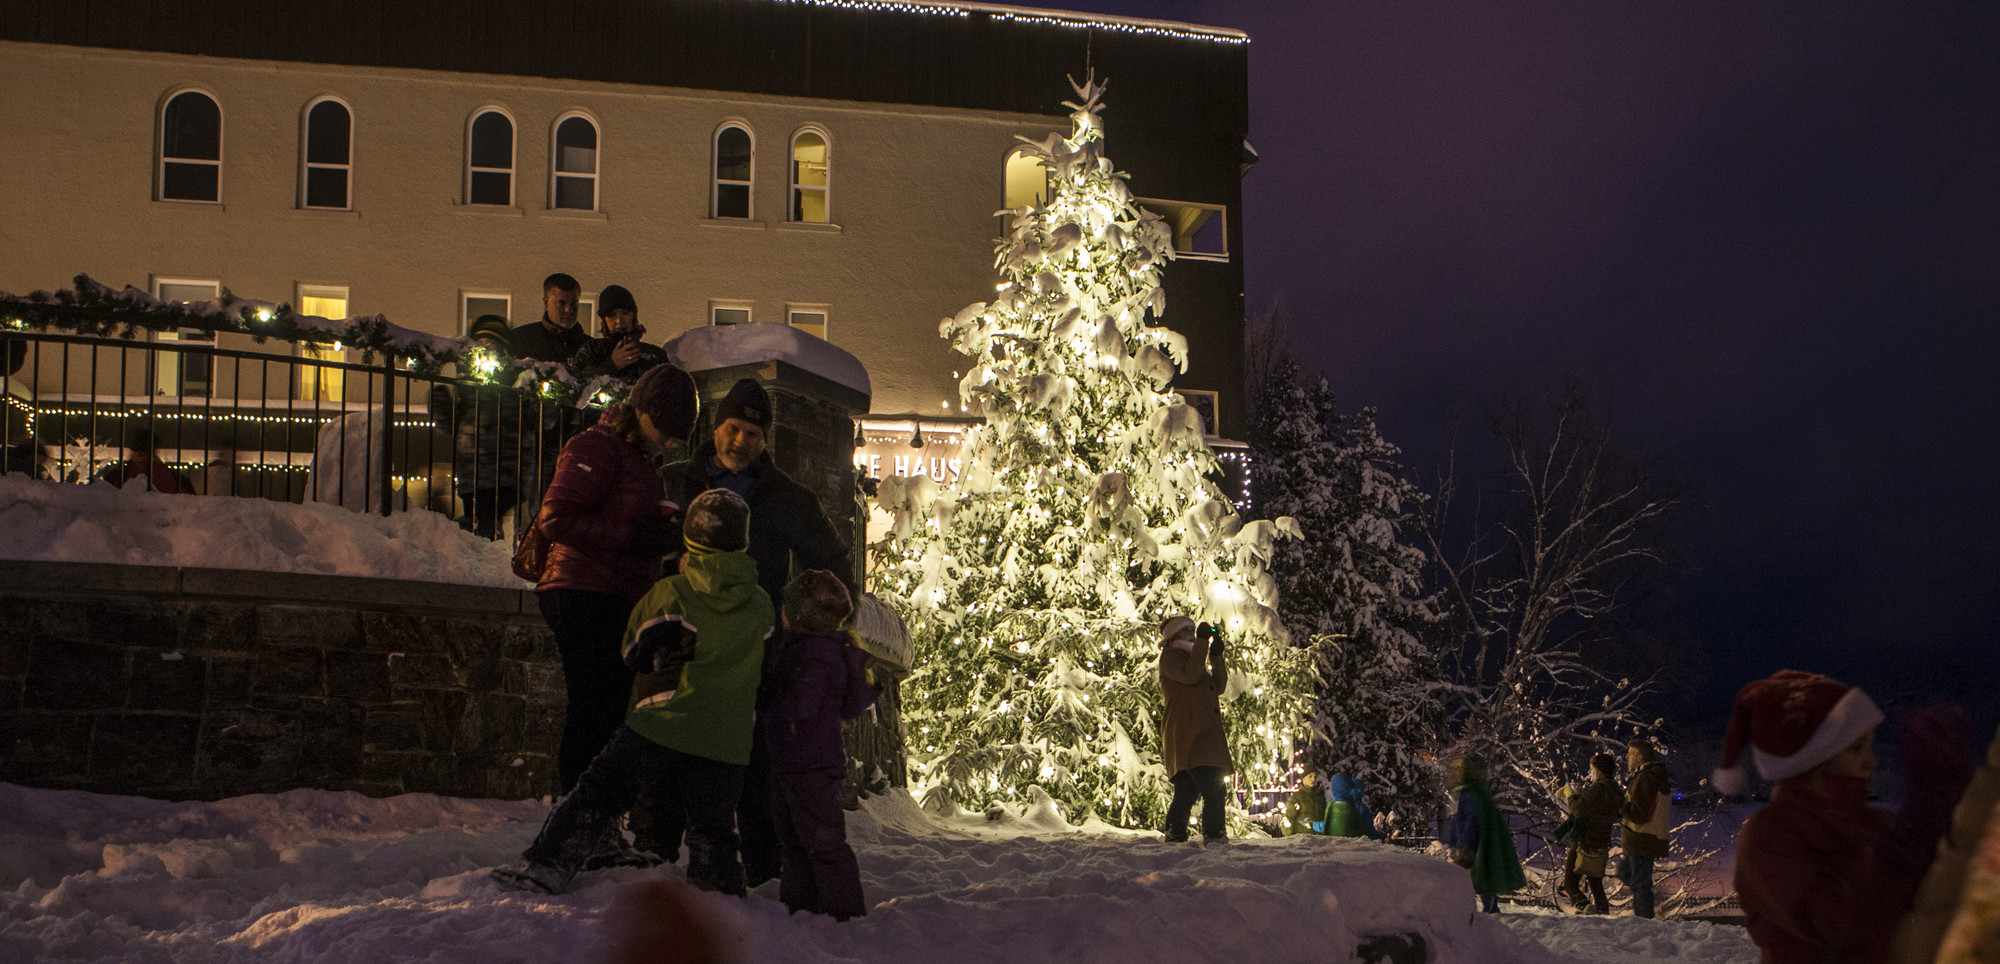 Children and adults play in the snow in front of a large tree covered in snow and white lights.